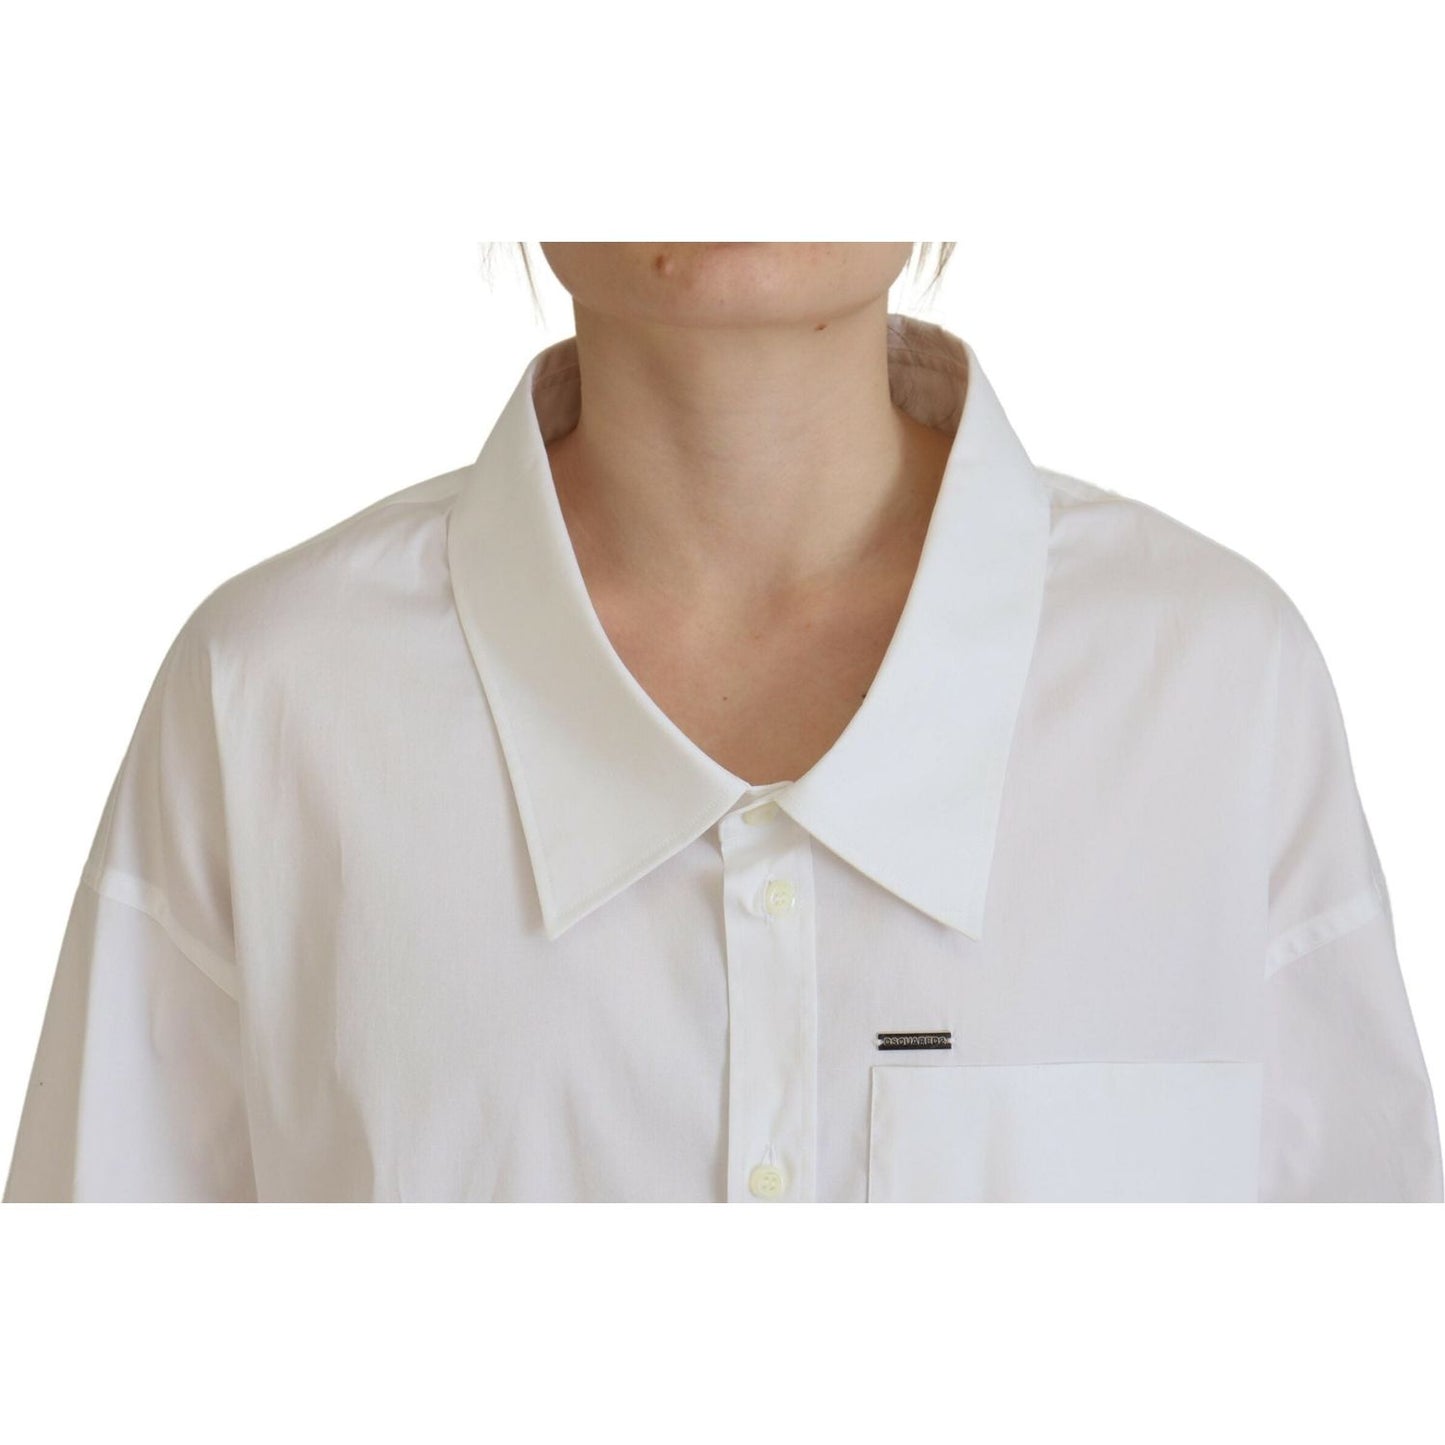 Dsquared² White Cotton Button Down Collared Dress Shirt Top white-cotton-button-down-collared-dress-shirt-top